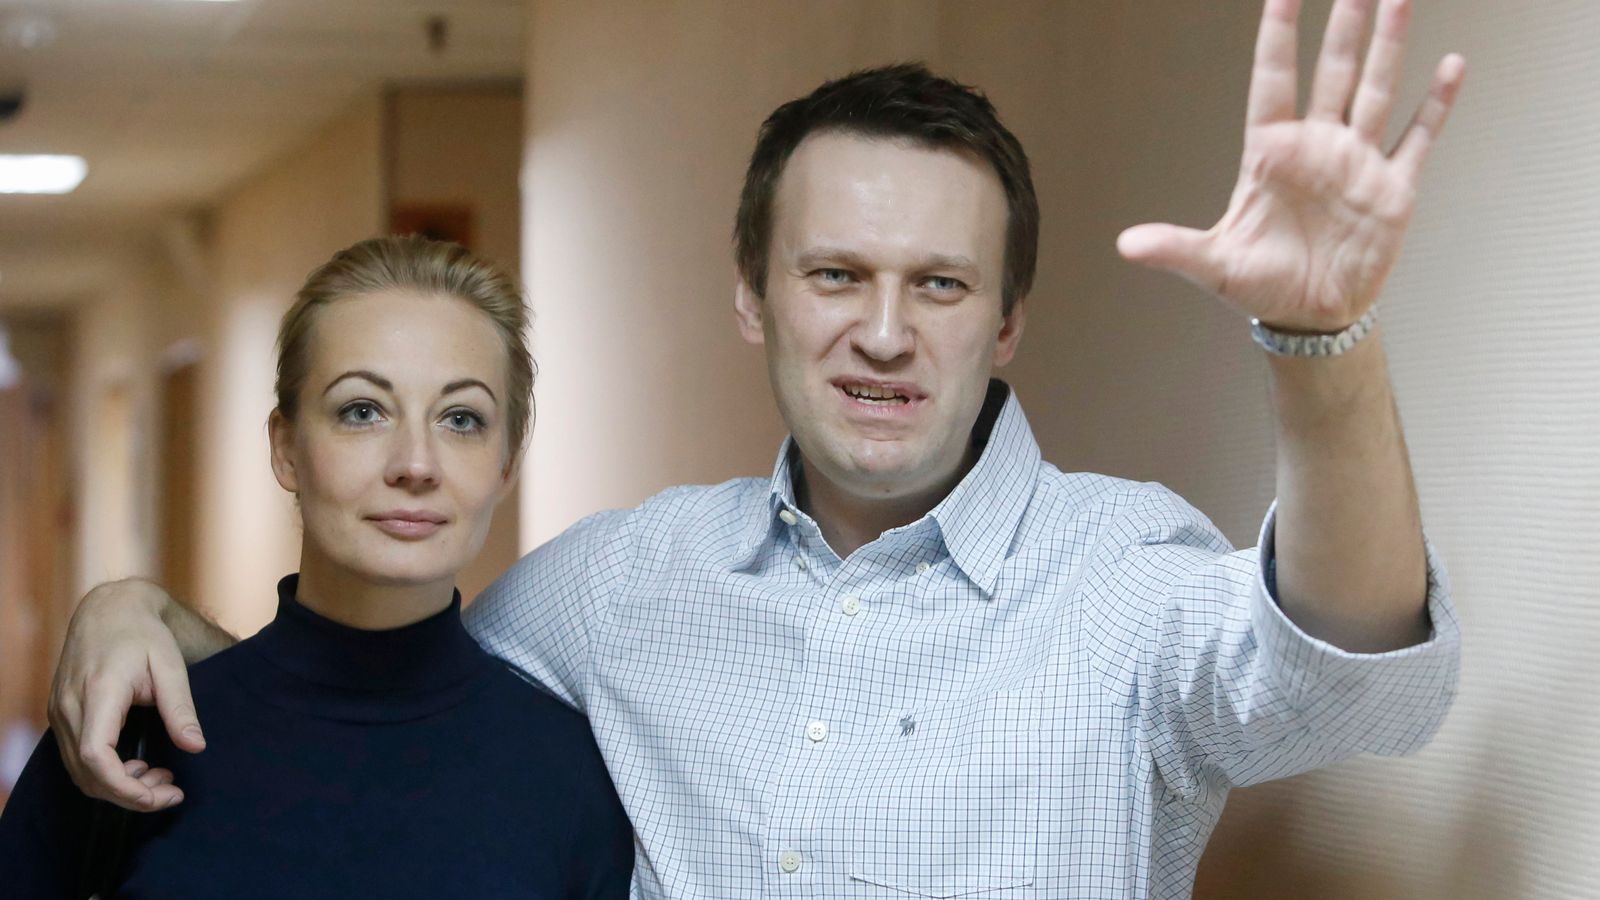 Widow of Alexei Navalny accuses Russian President Putin of killing her husband and hiding his body